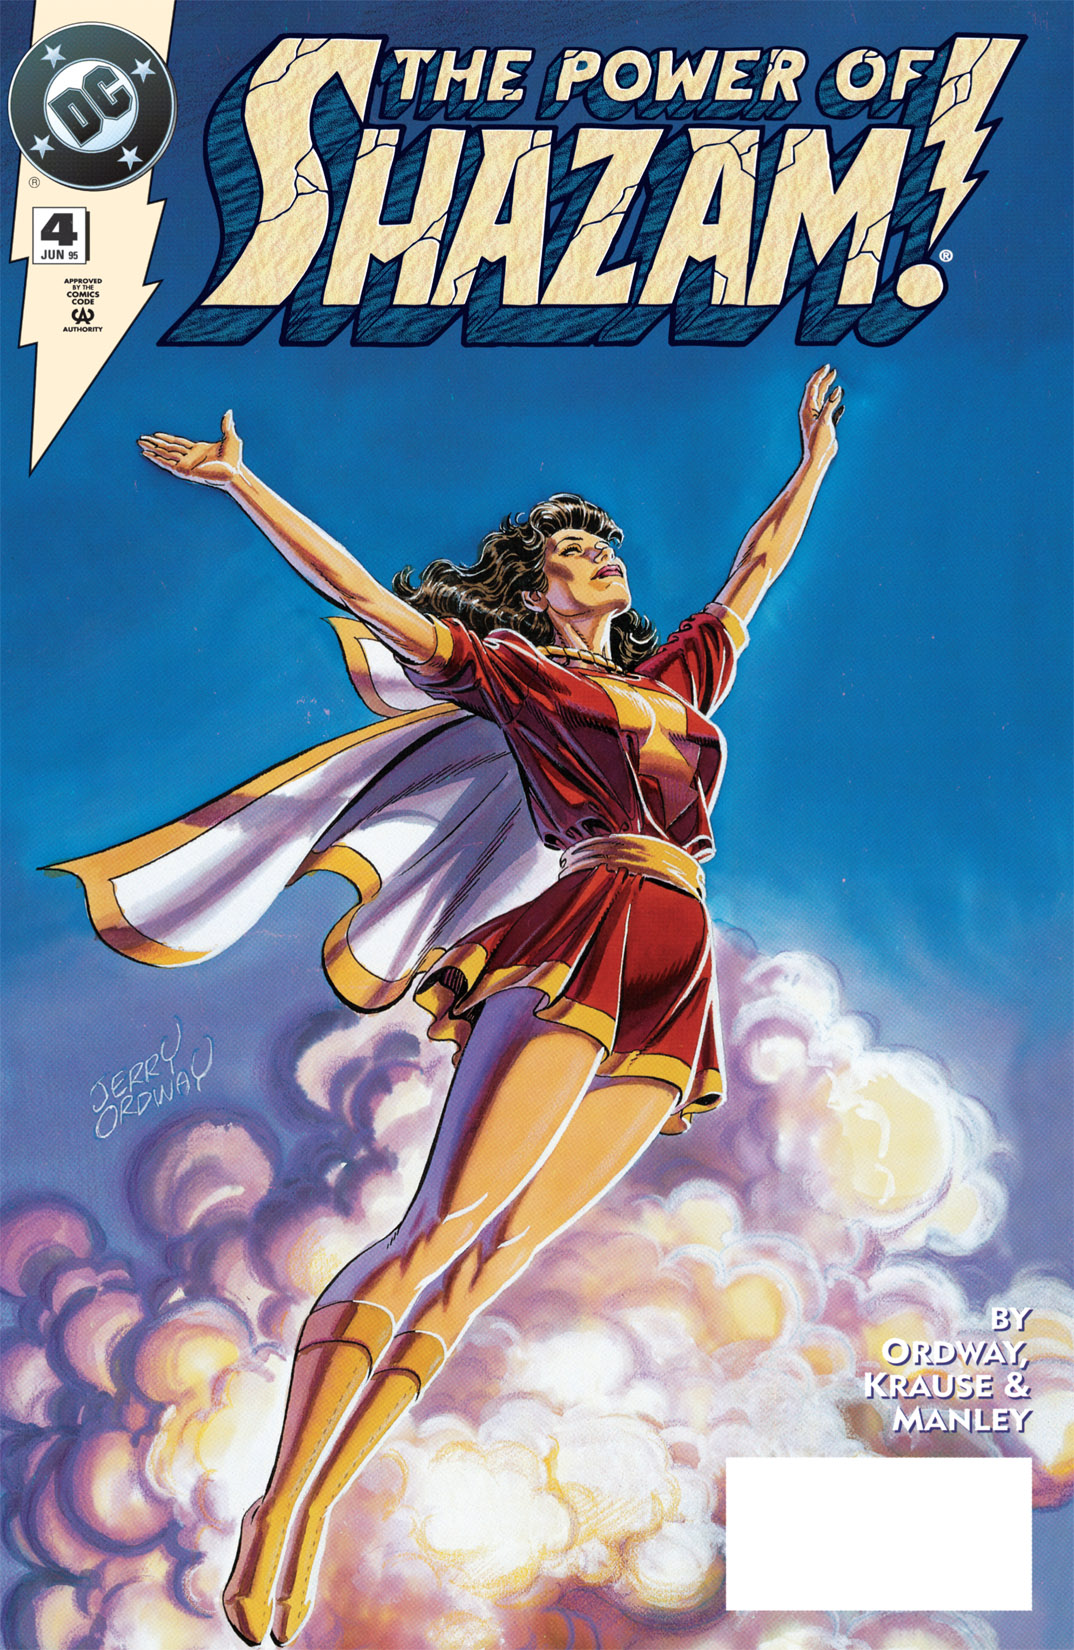 Read online The Power of SHAZAM! comic -  Issue #4 - 1